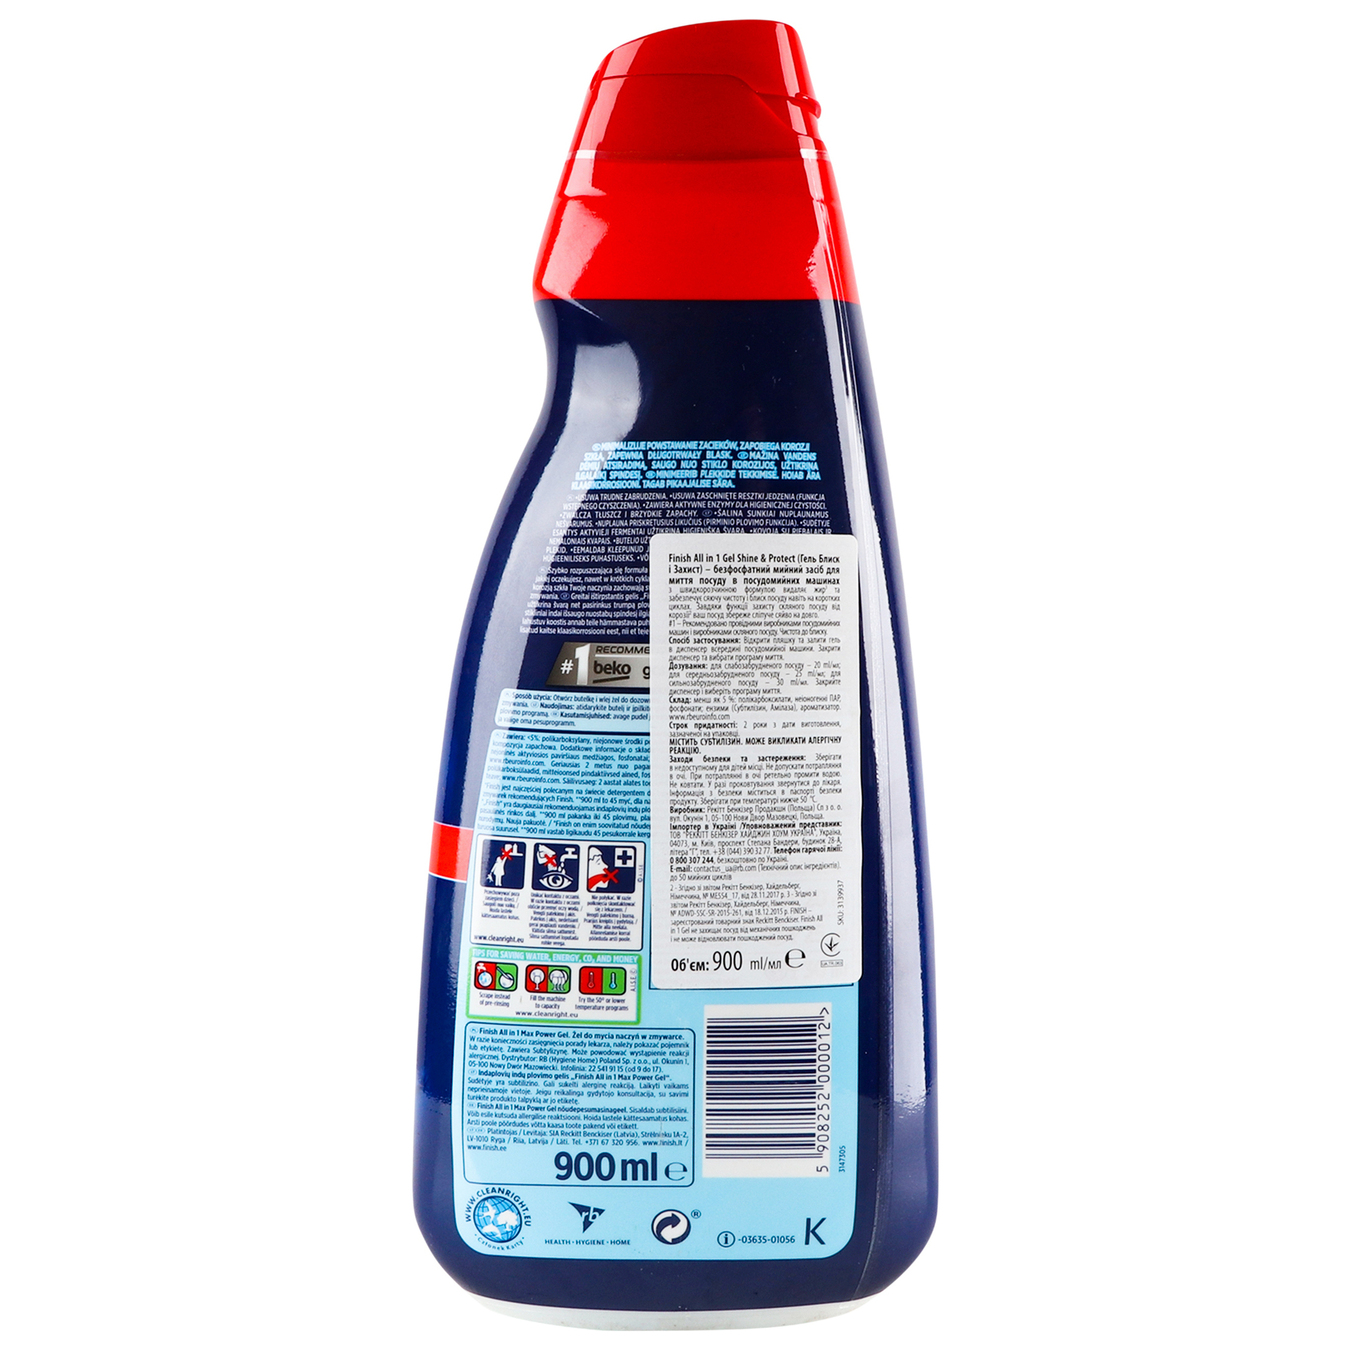 Gel for washing dishes Finish Power All in 1 in dishwashers 900 ml 2